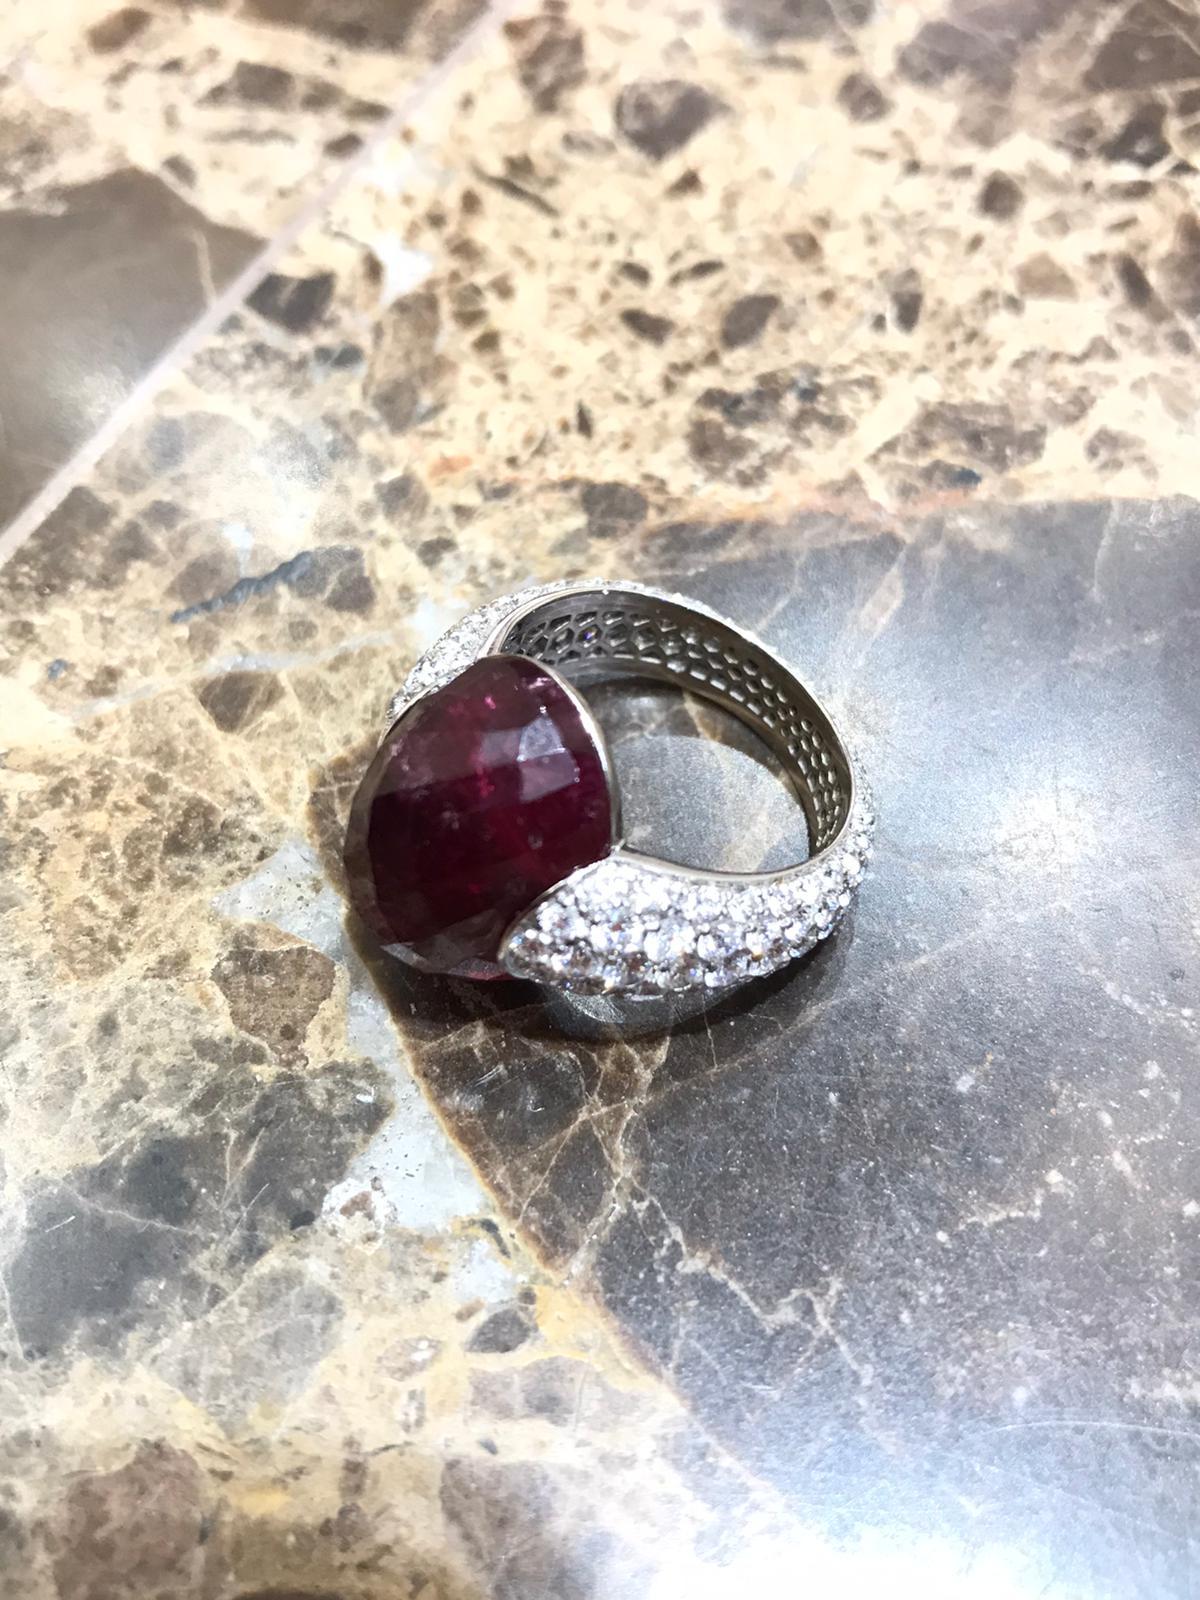 Embrace Collection by Angeletti. White Gold Ring With Rubellite Faceted and Diamonds Full Pavè.
Unique Rubellite (ct. 17.67) faceted by Expert Hands Wholly Natural, No treatment at all. Traditional Embrace Model, Designed and Manifactured in Rome.